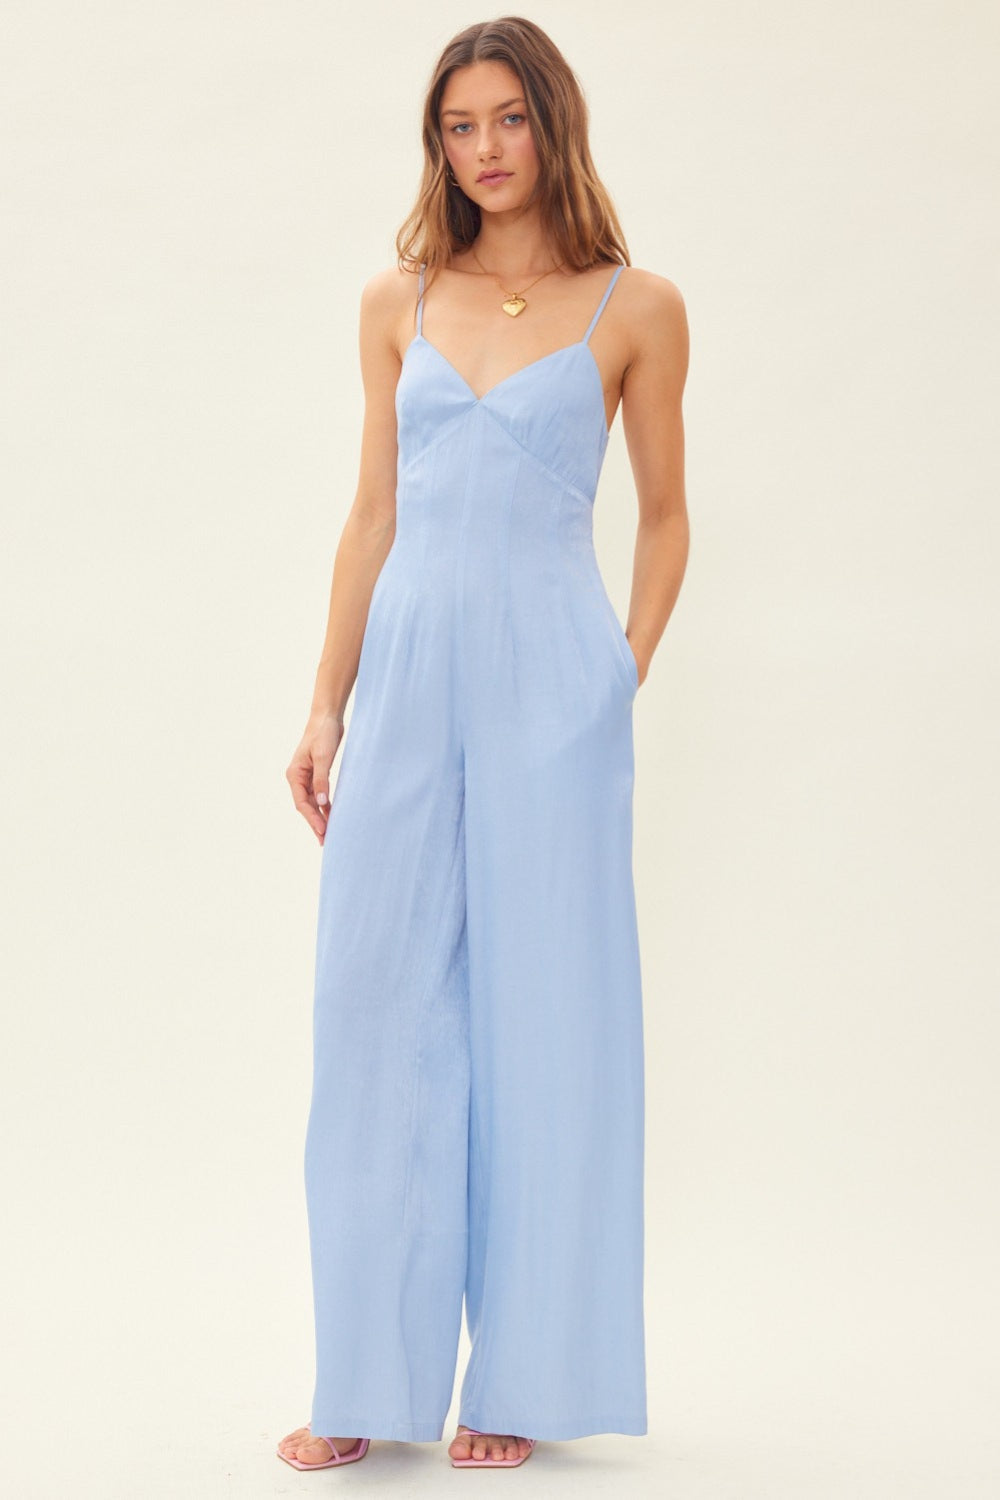 Drawstring Back Sleeveless Wide Leg Jumpsuit for Women | Jumpsuits | Ro + Ivy